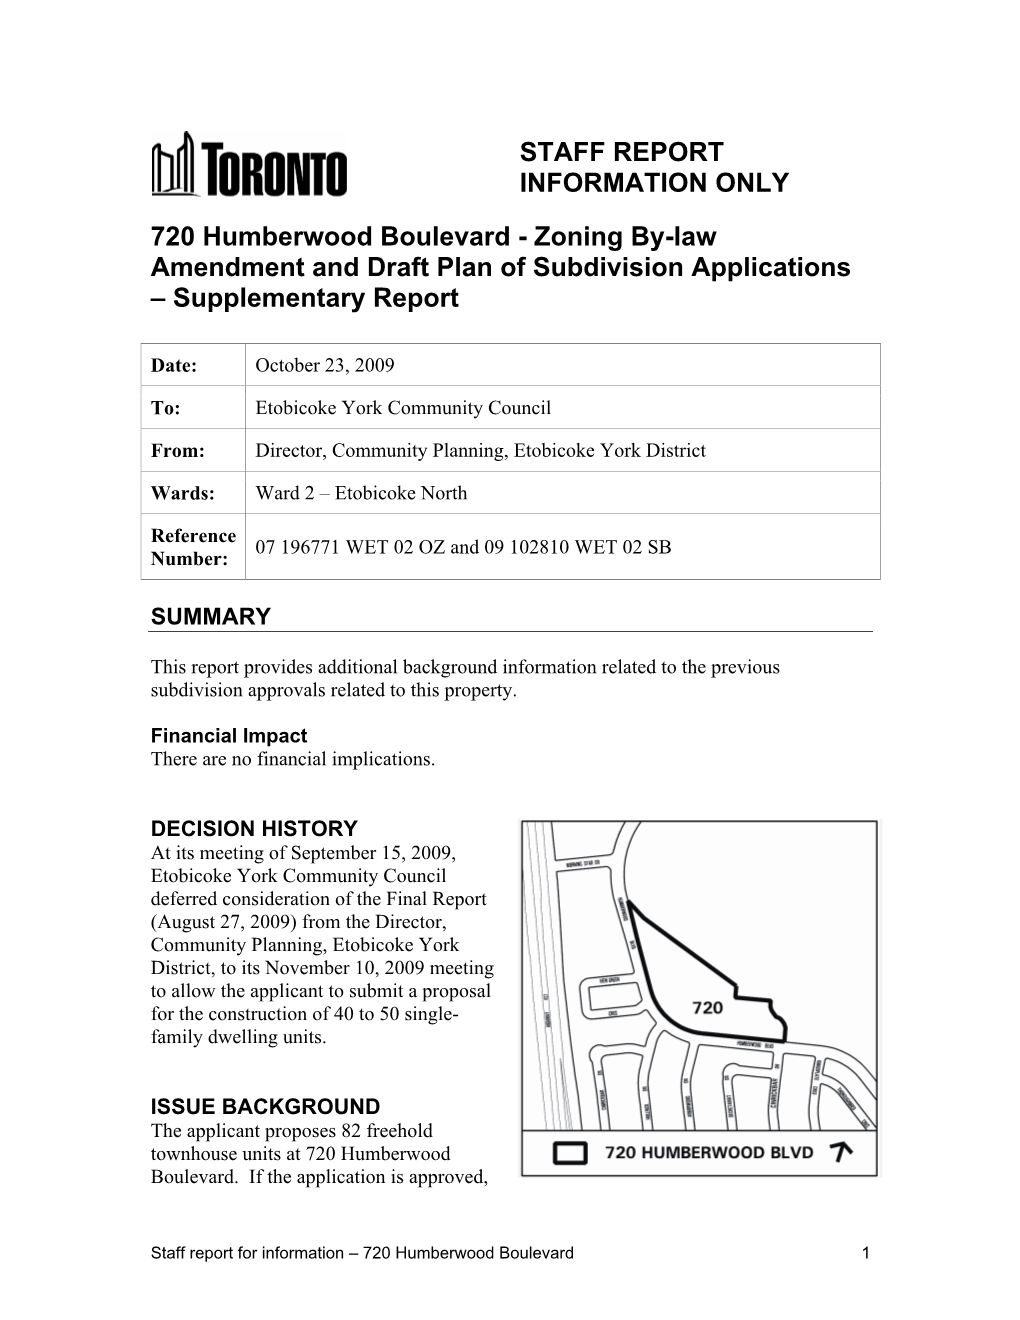 STAFF REPORT INFORMATION ONLY 720 Humberwood Boulevard - Zoning By-Law Amendment and Draft Plan of Subdivision Applications – Supplementary Report